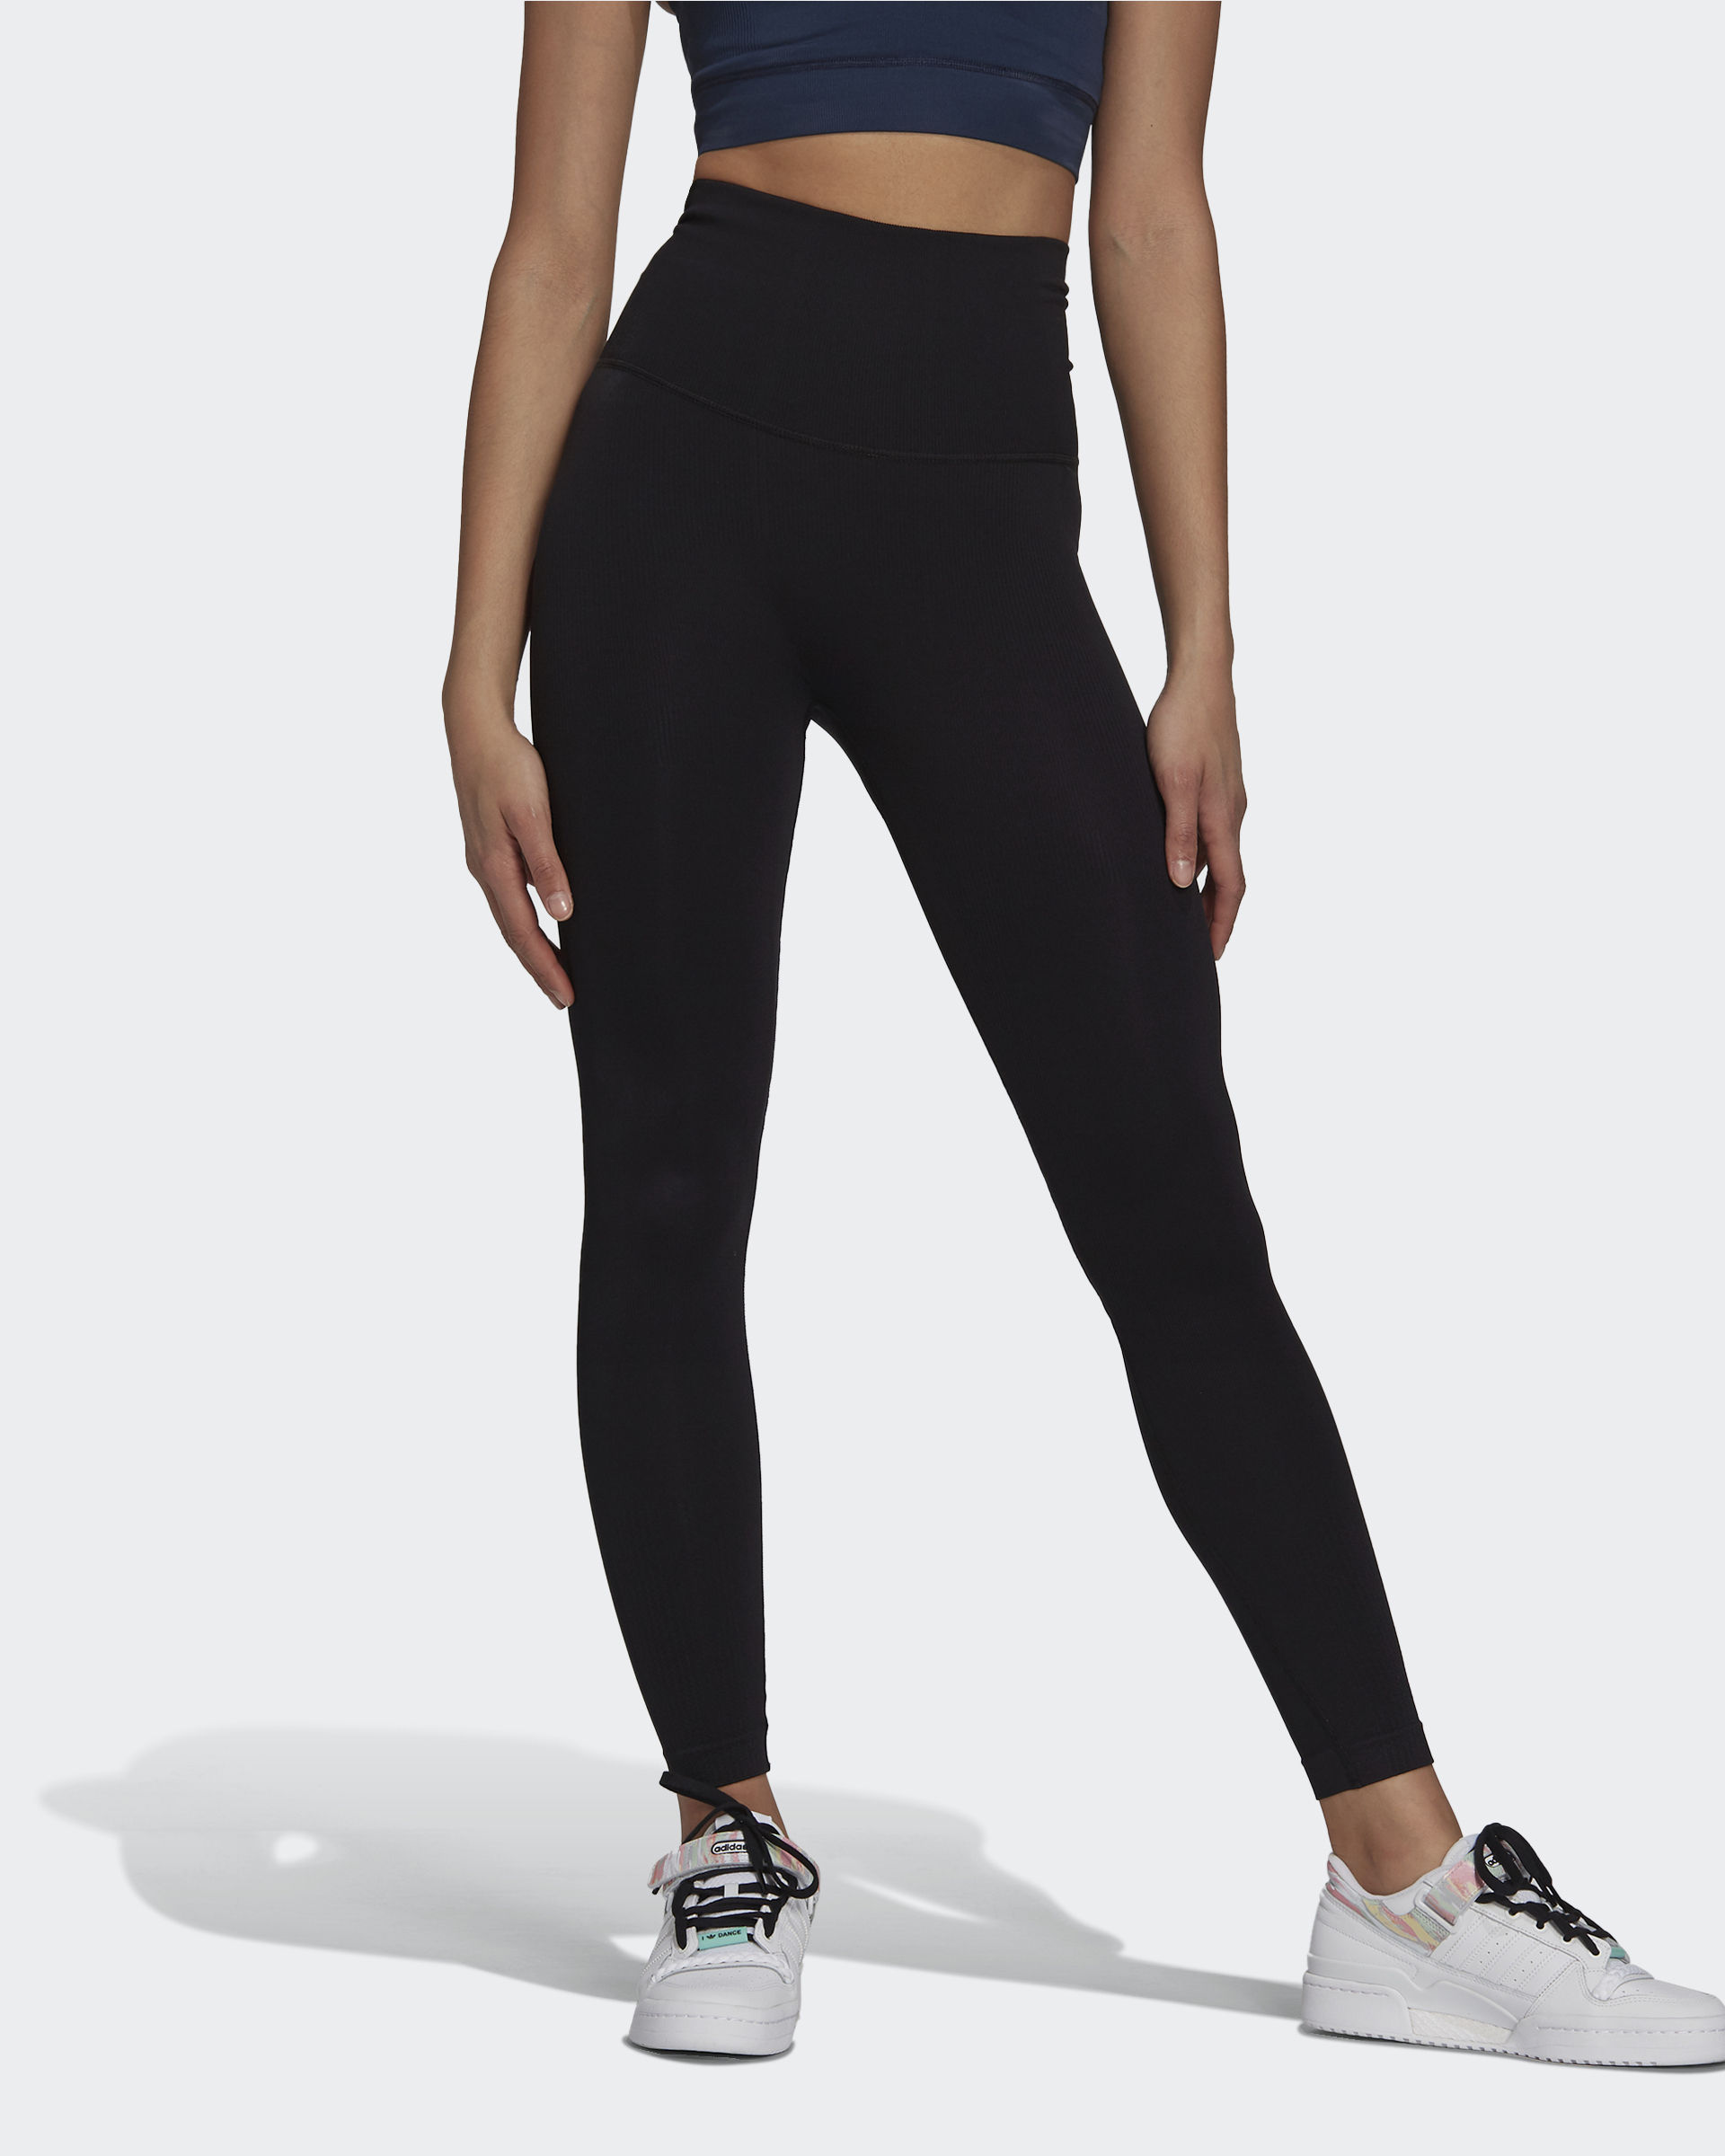 Nux Luxe Leggings - Fitness Incentive %